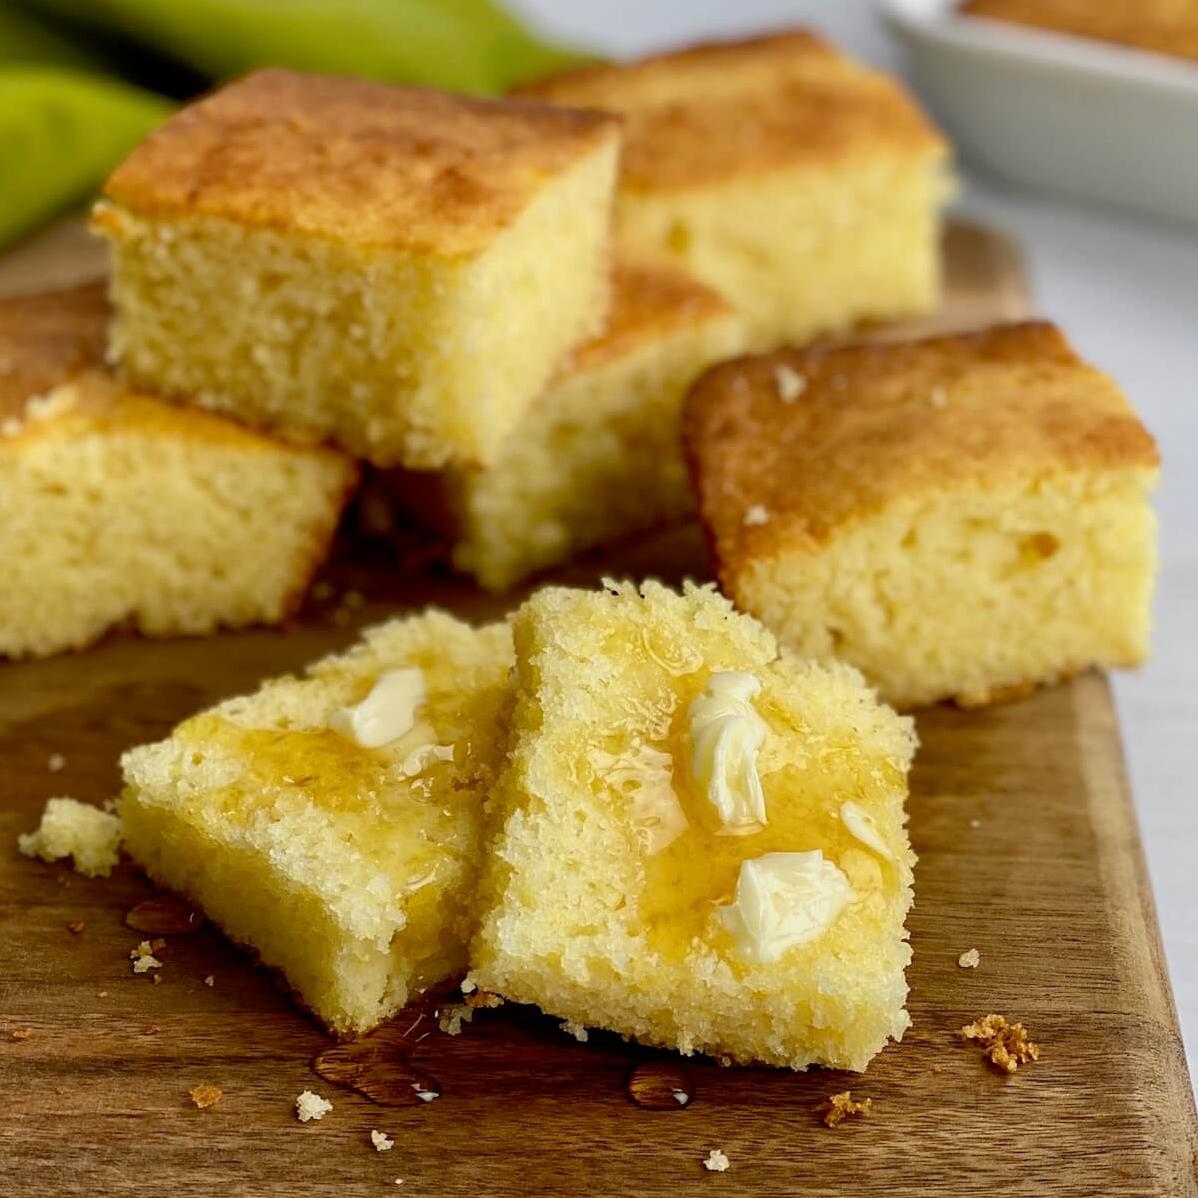  Perfectly paired with chili or soup, this gluten-free cornbread will satisfy any carb craving.